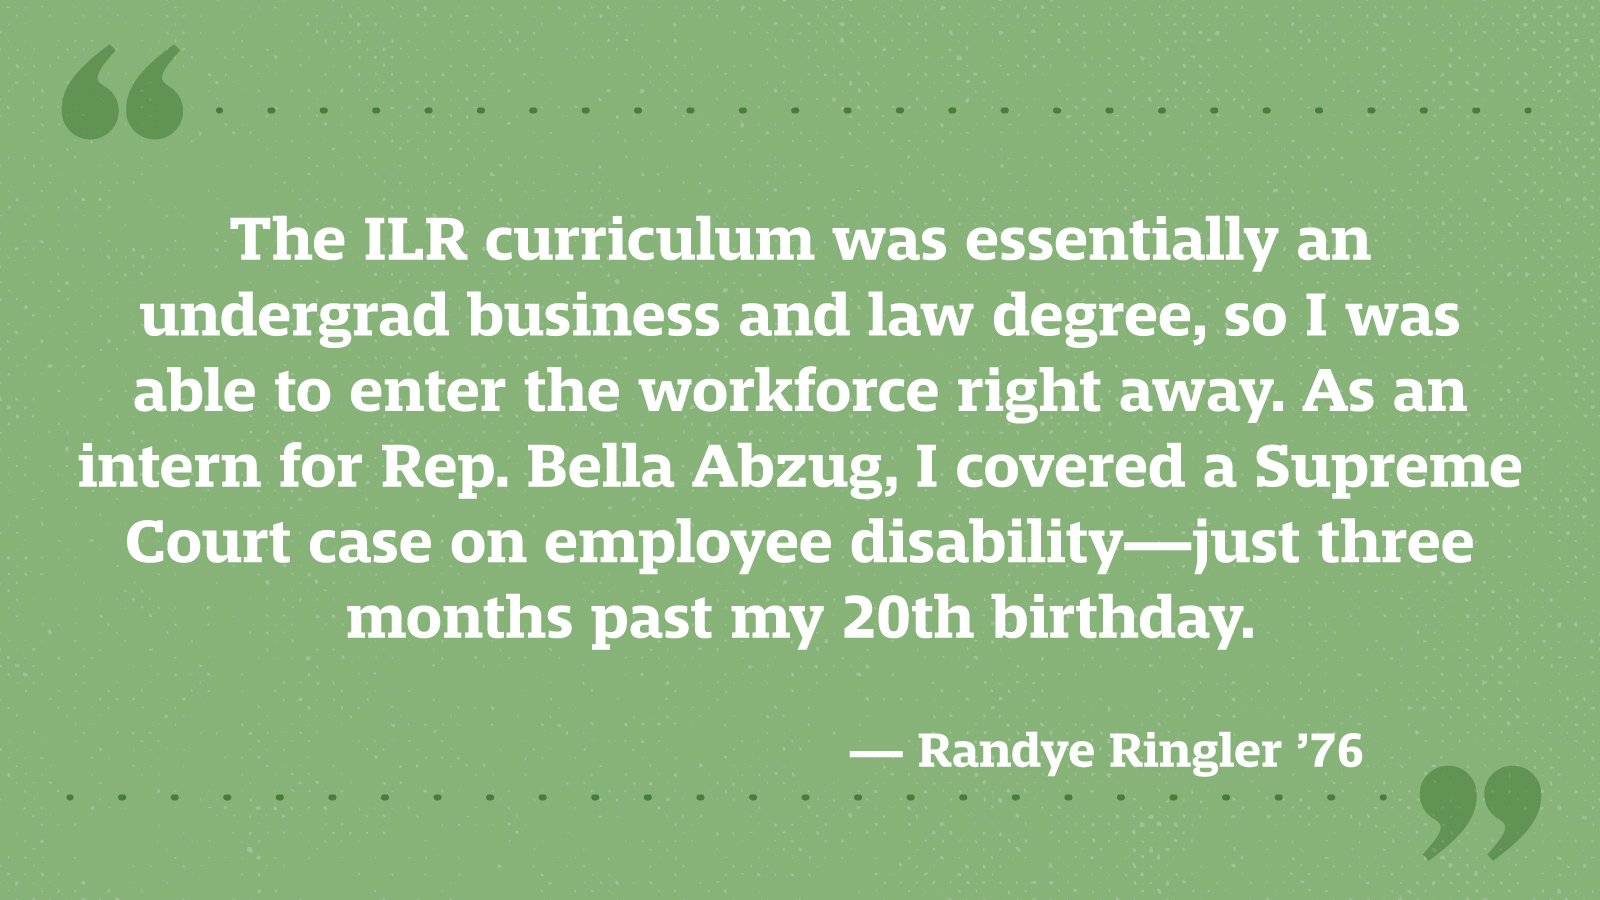 The ILR curriculum was essentially an undergrad business and law degree, so I was able to enter the workforce right away. As an intern for Rep. Bella Abzug, I covered a Supreme Court case on employee disability—just three months past my 20th birthday. — Randye Ringler ’76